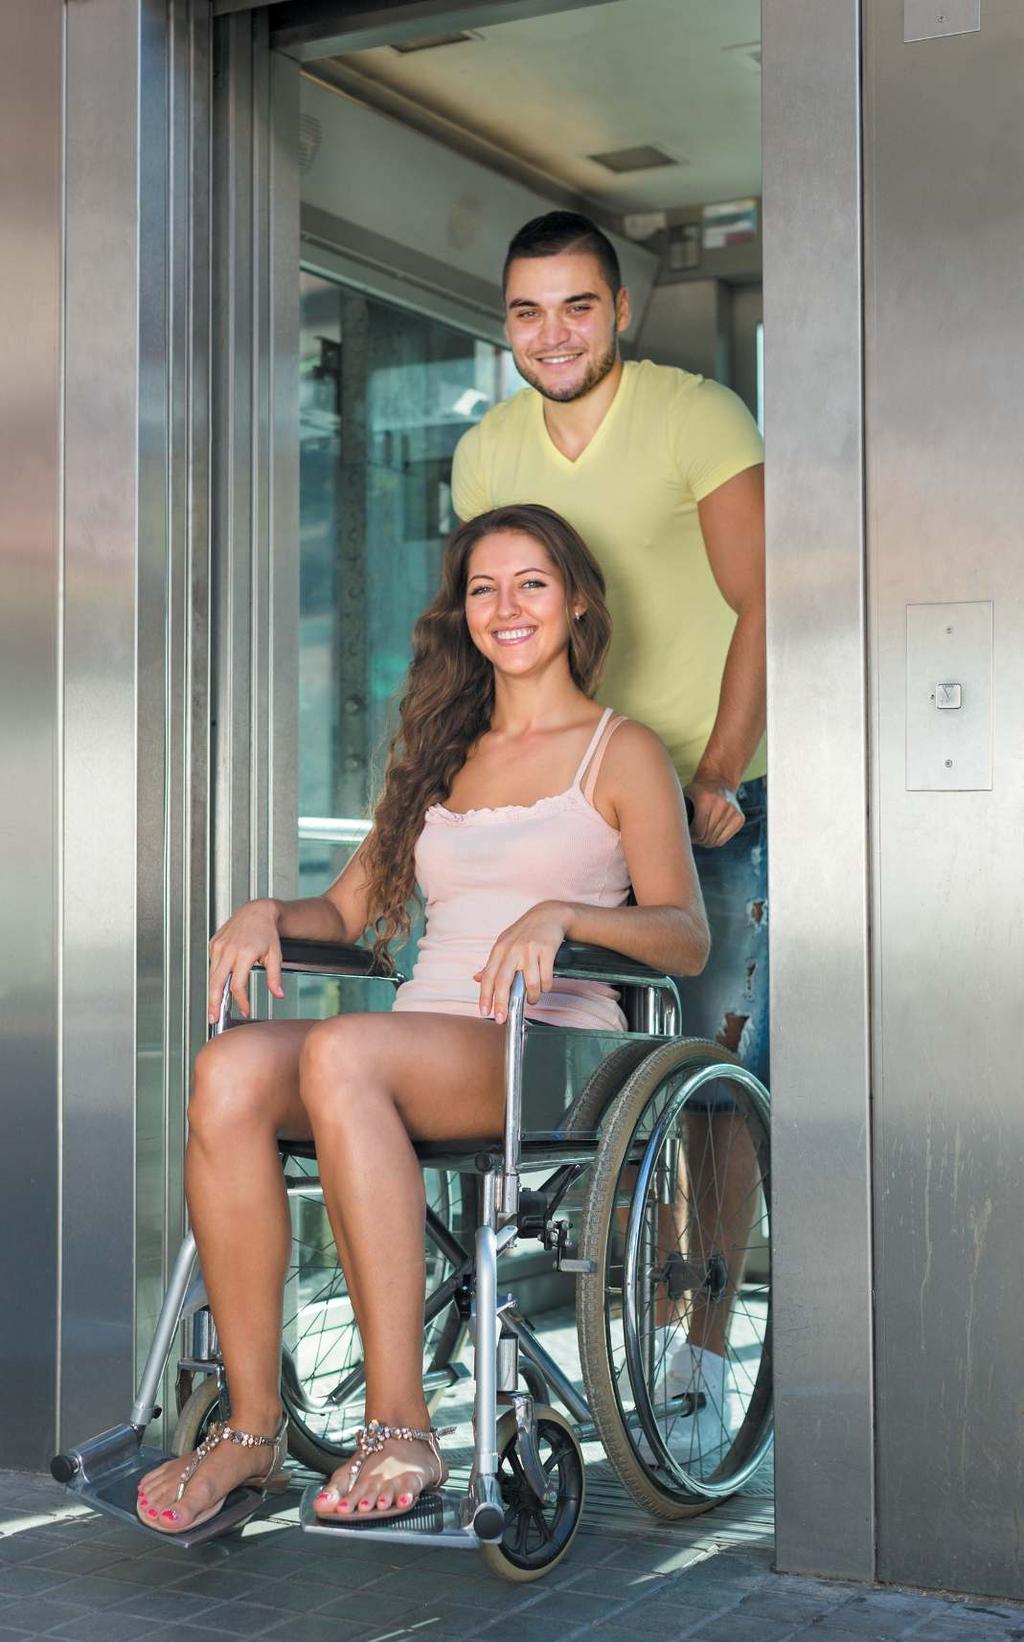 Elevator content to help disabled people.